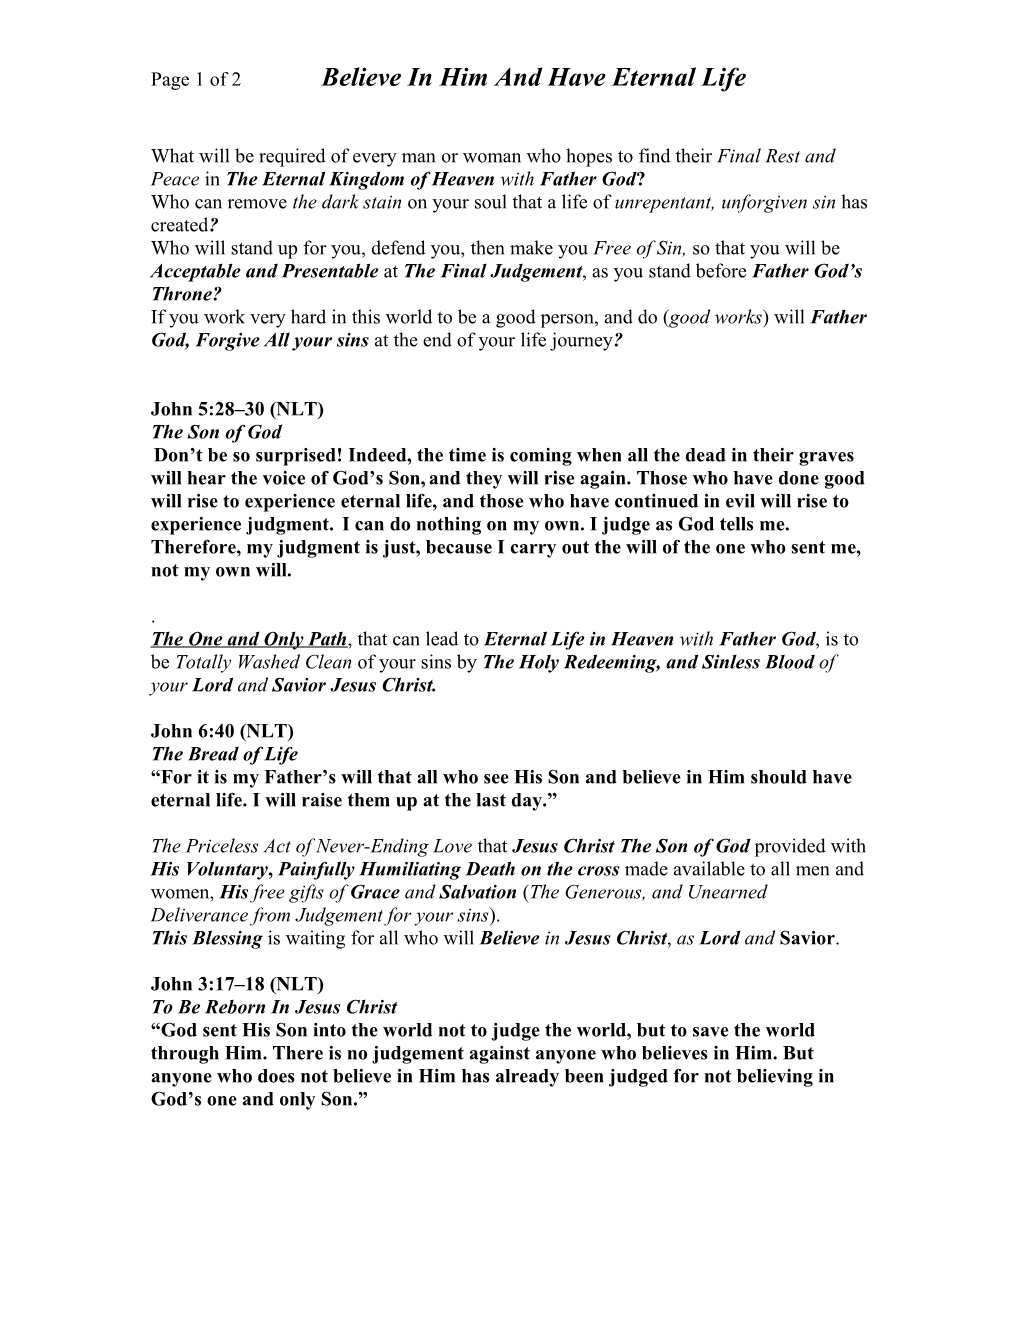 Page 1 of 2 Believe in Him and Have Eternal Life